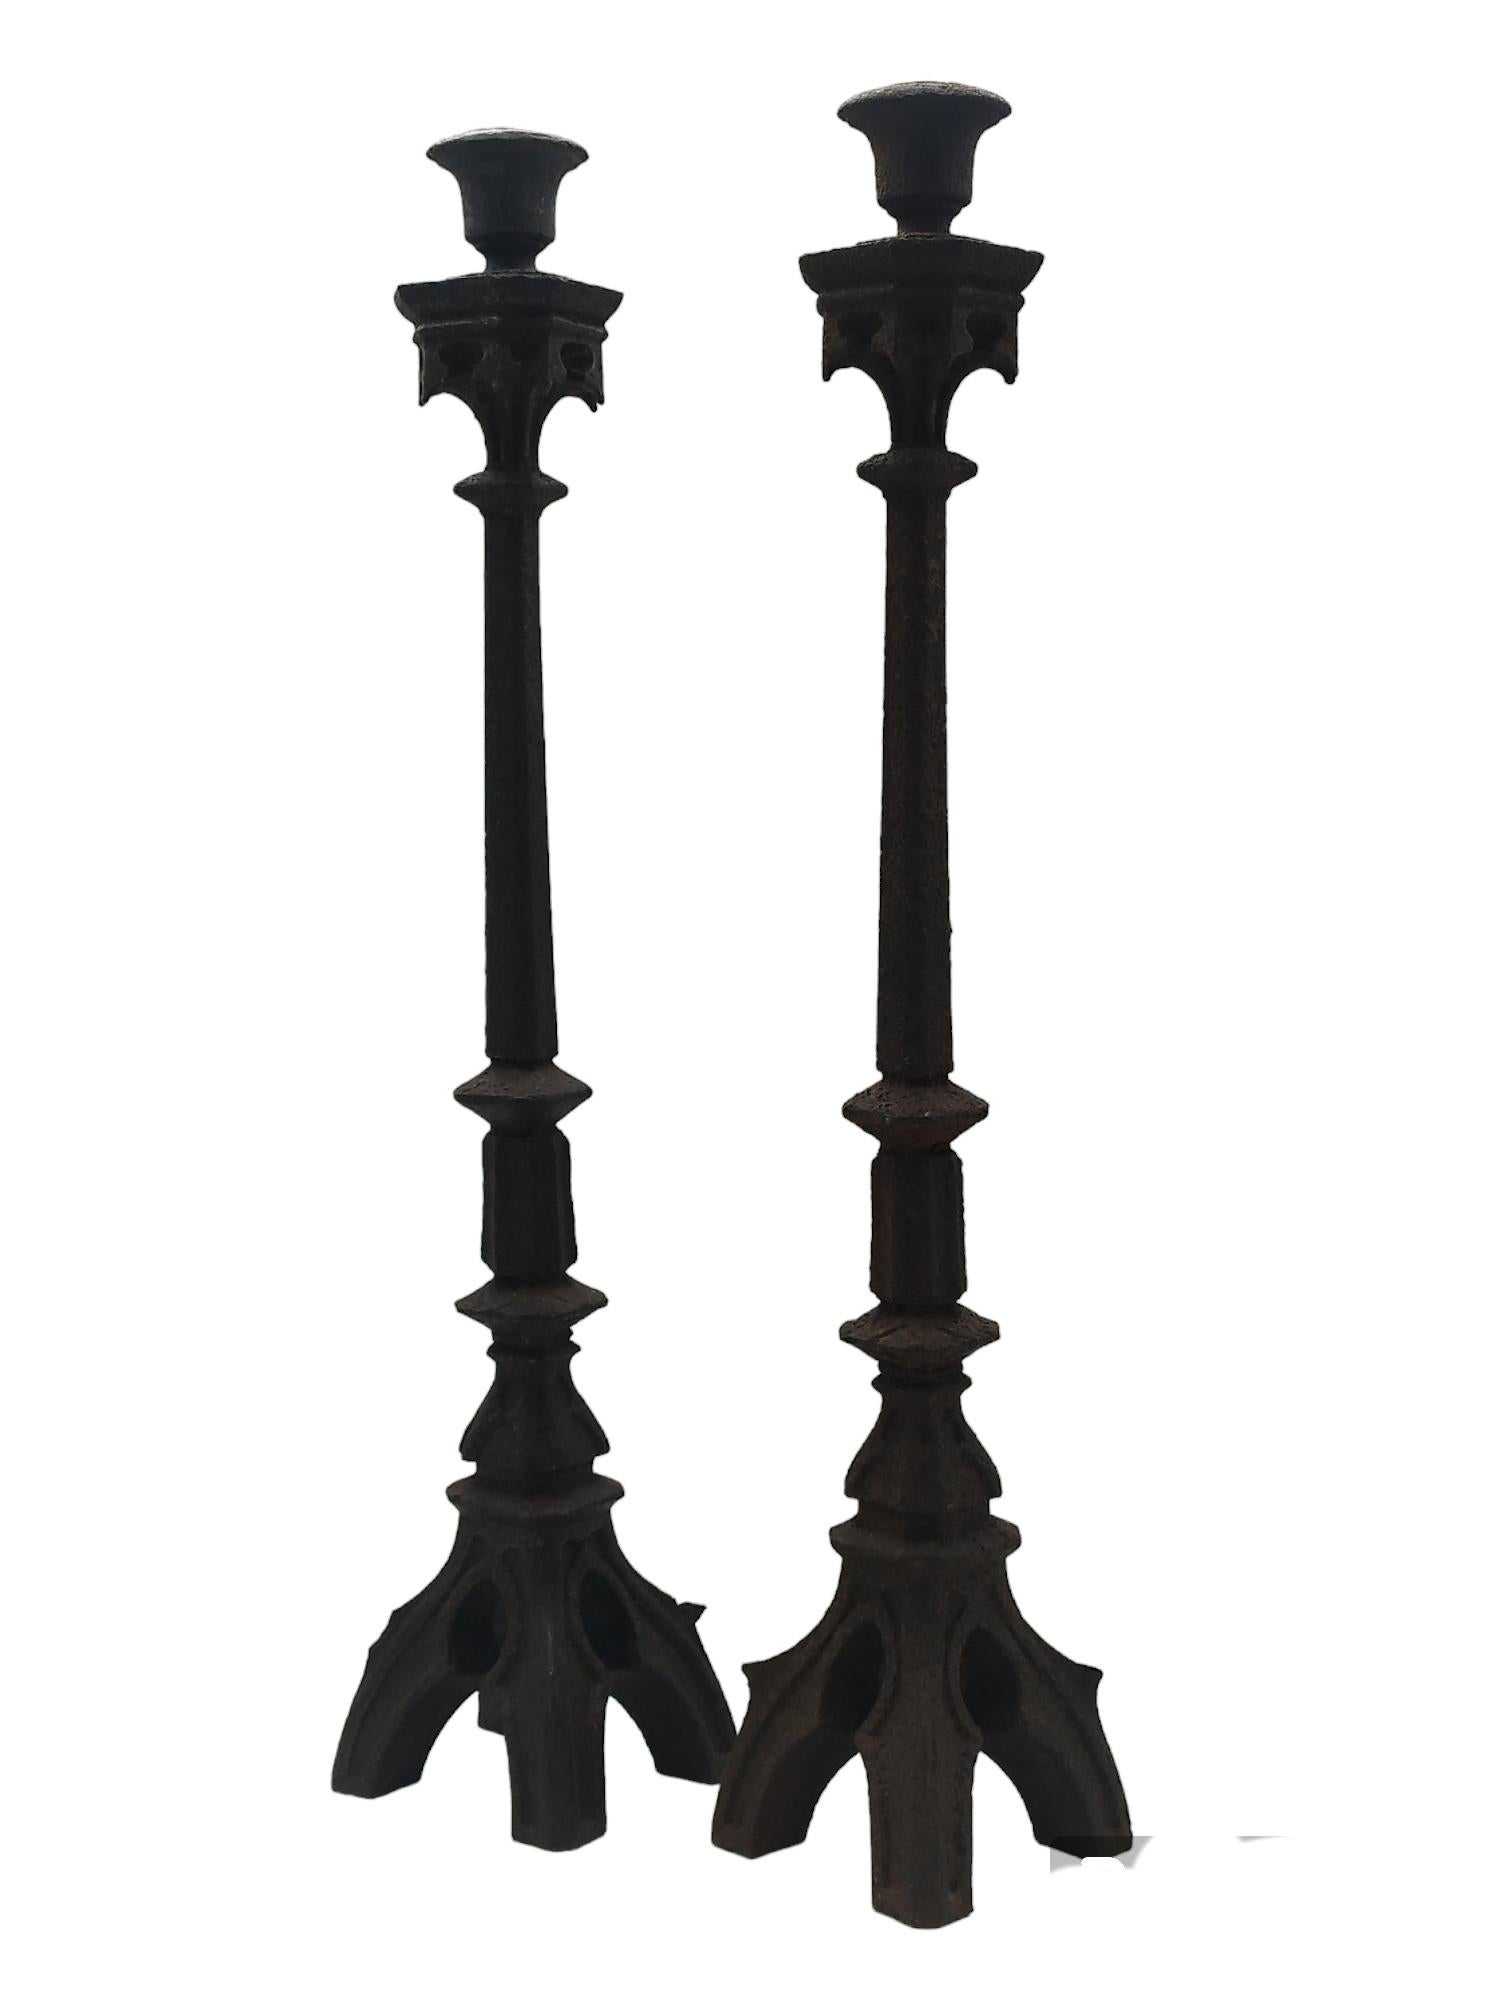 Gothic Revival Pair of Neo-Gothic Iron Altar Candlesticks, Italy, 19th century For Sale